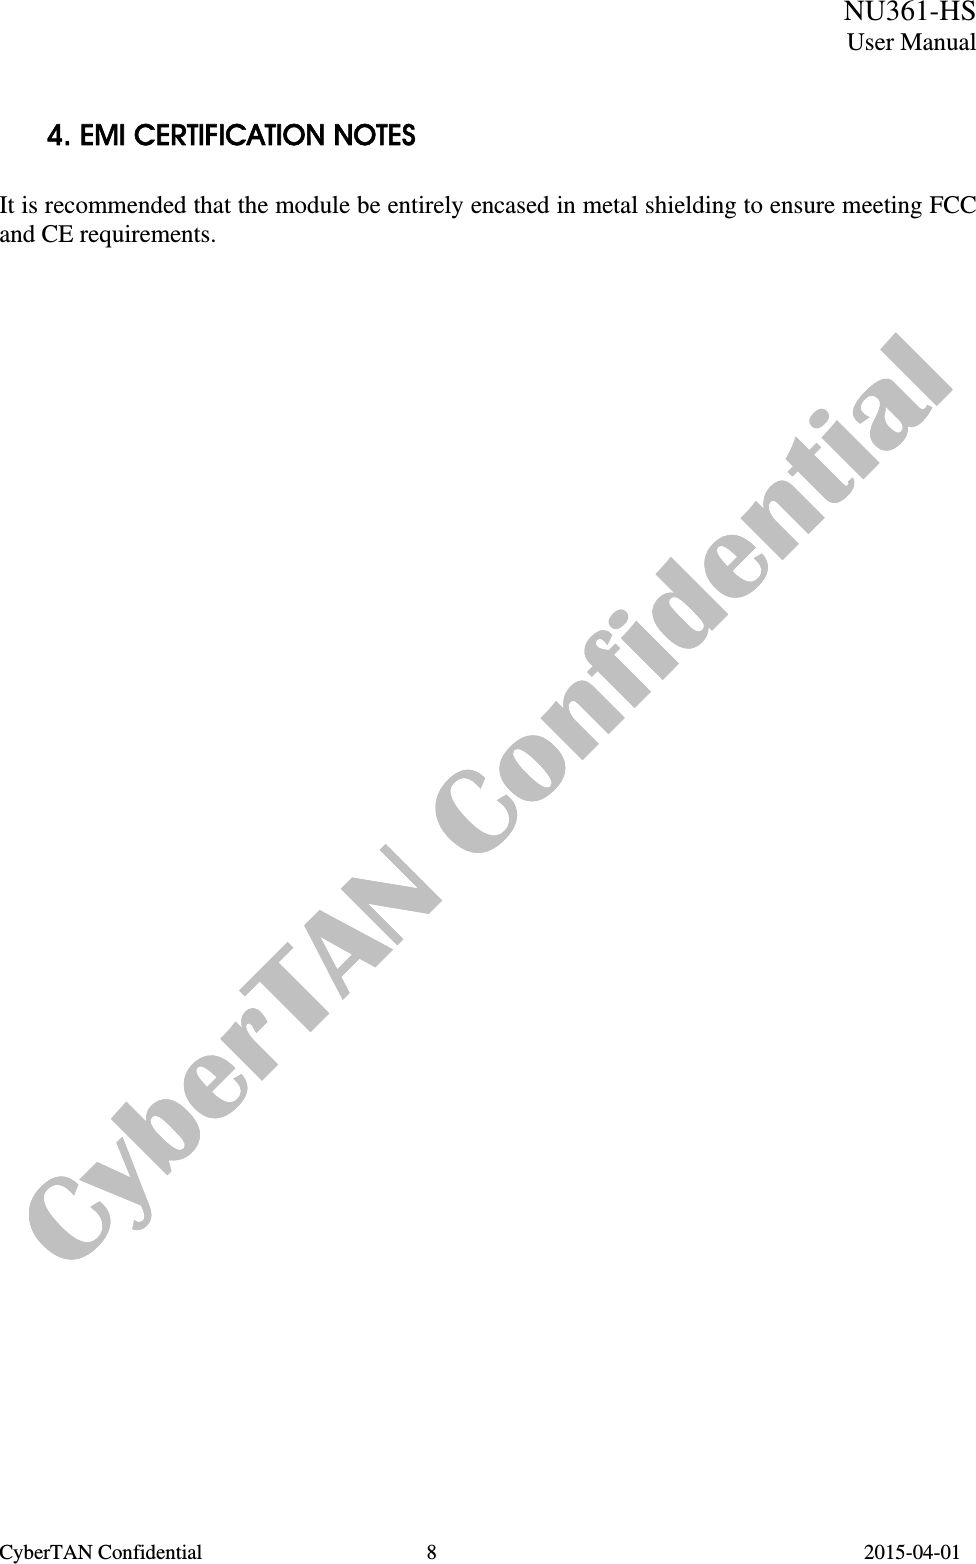  NU361-HS User Manual CyberTAN Confidential  8                                         2015-04-01   4. EMI CERTIFICATION NOTES  It is recommended that the module be entirely encased in metal shielding to ensure meeting FCC and CE requirements.     